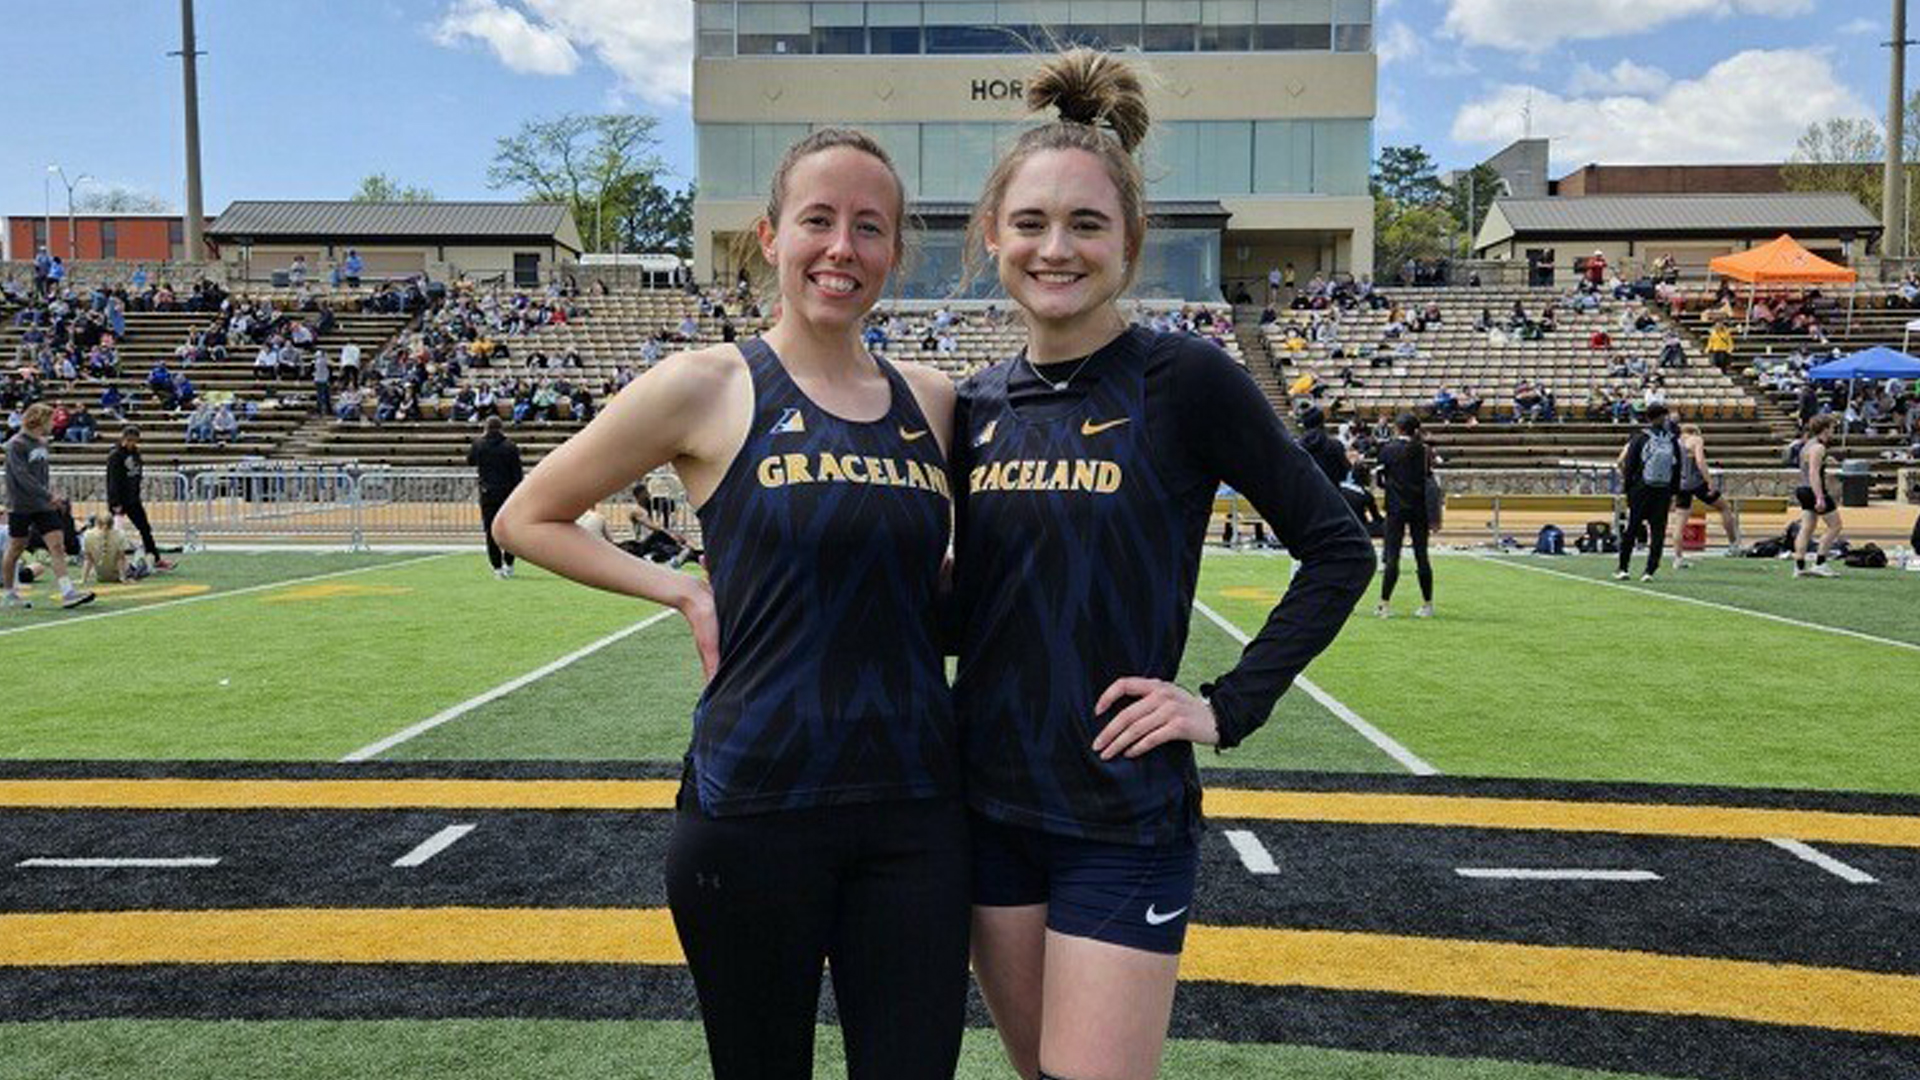 Women’s Track and Field Conclude at the Midwest Classis; K. Perkins and Gilliland Finish Second